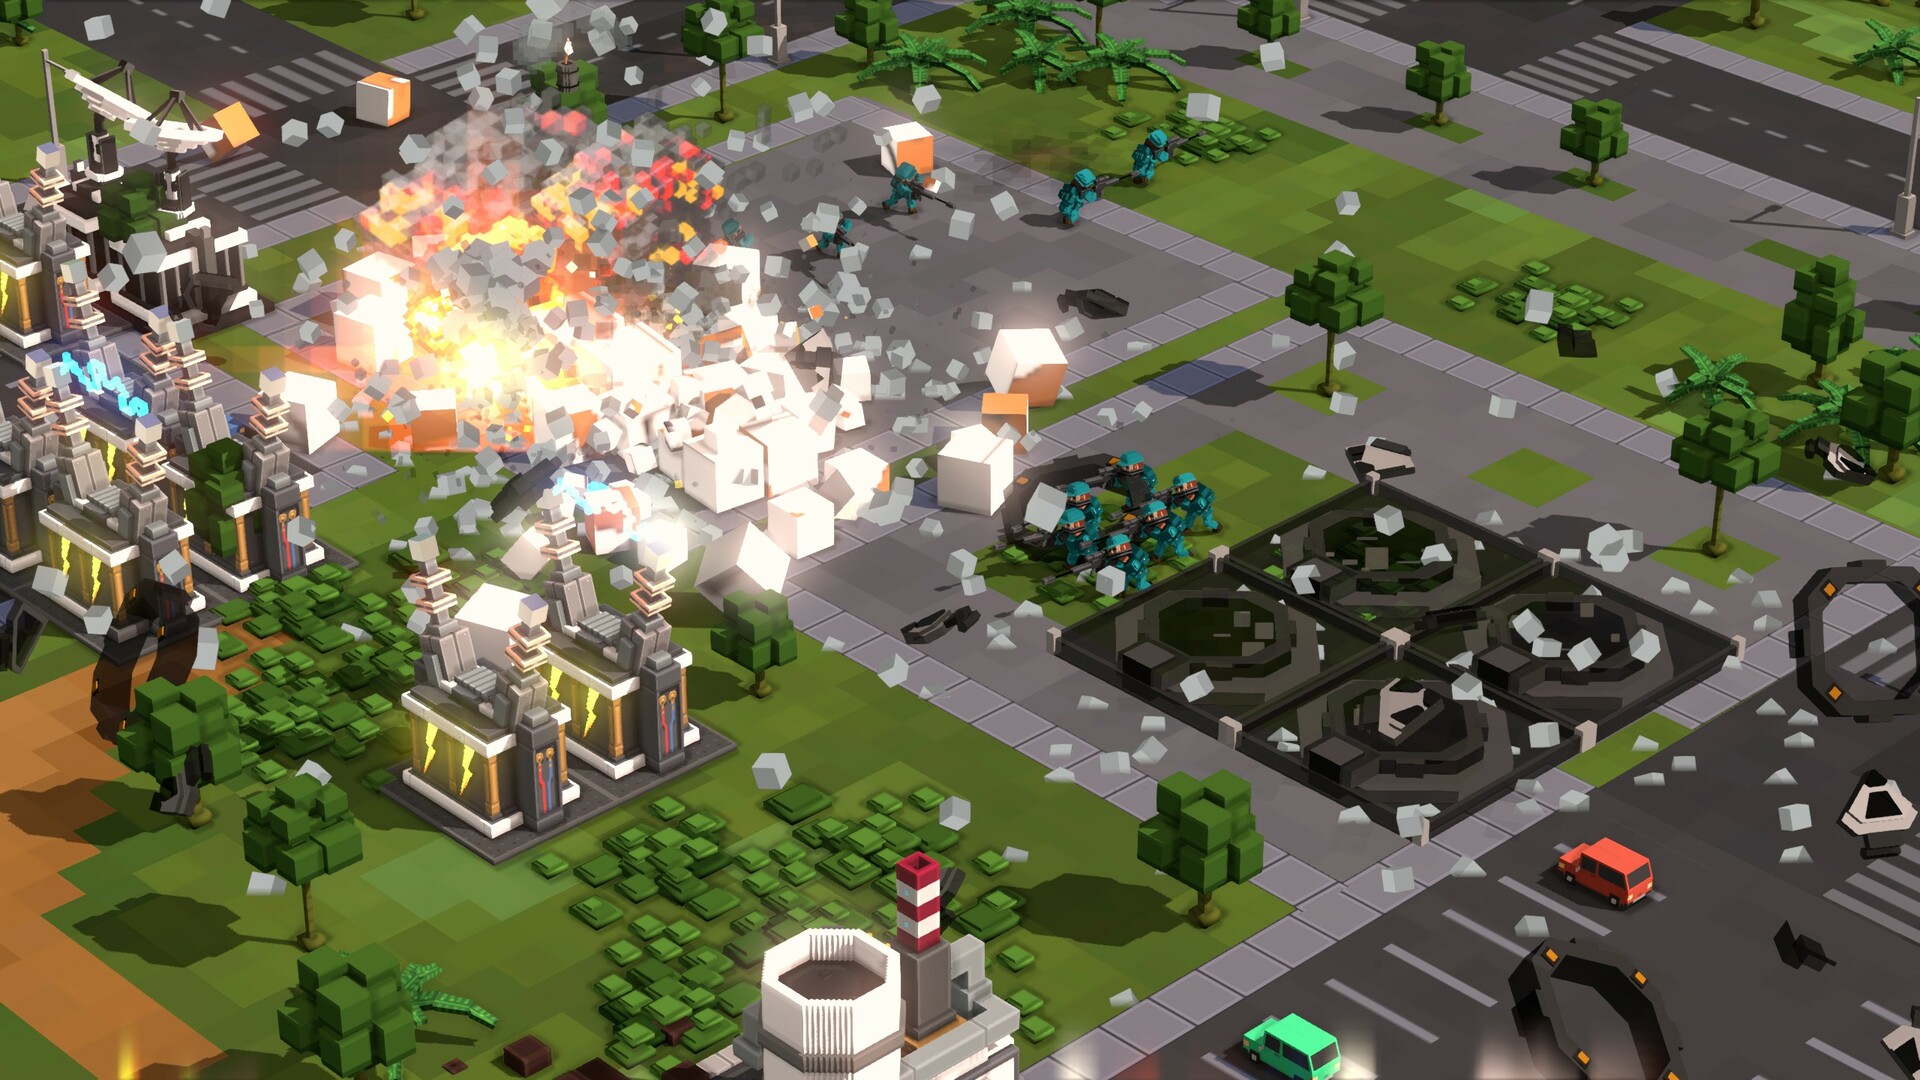  Here's a blocky voxel RTS from the studio that made the Command & Conquer remasters 